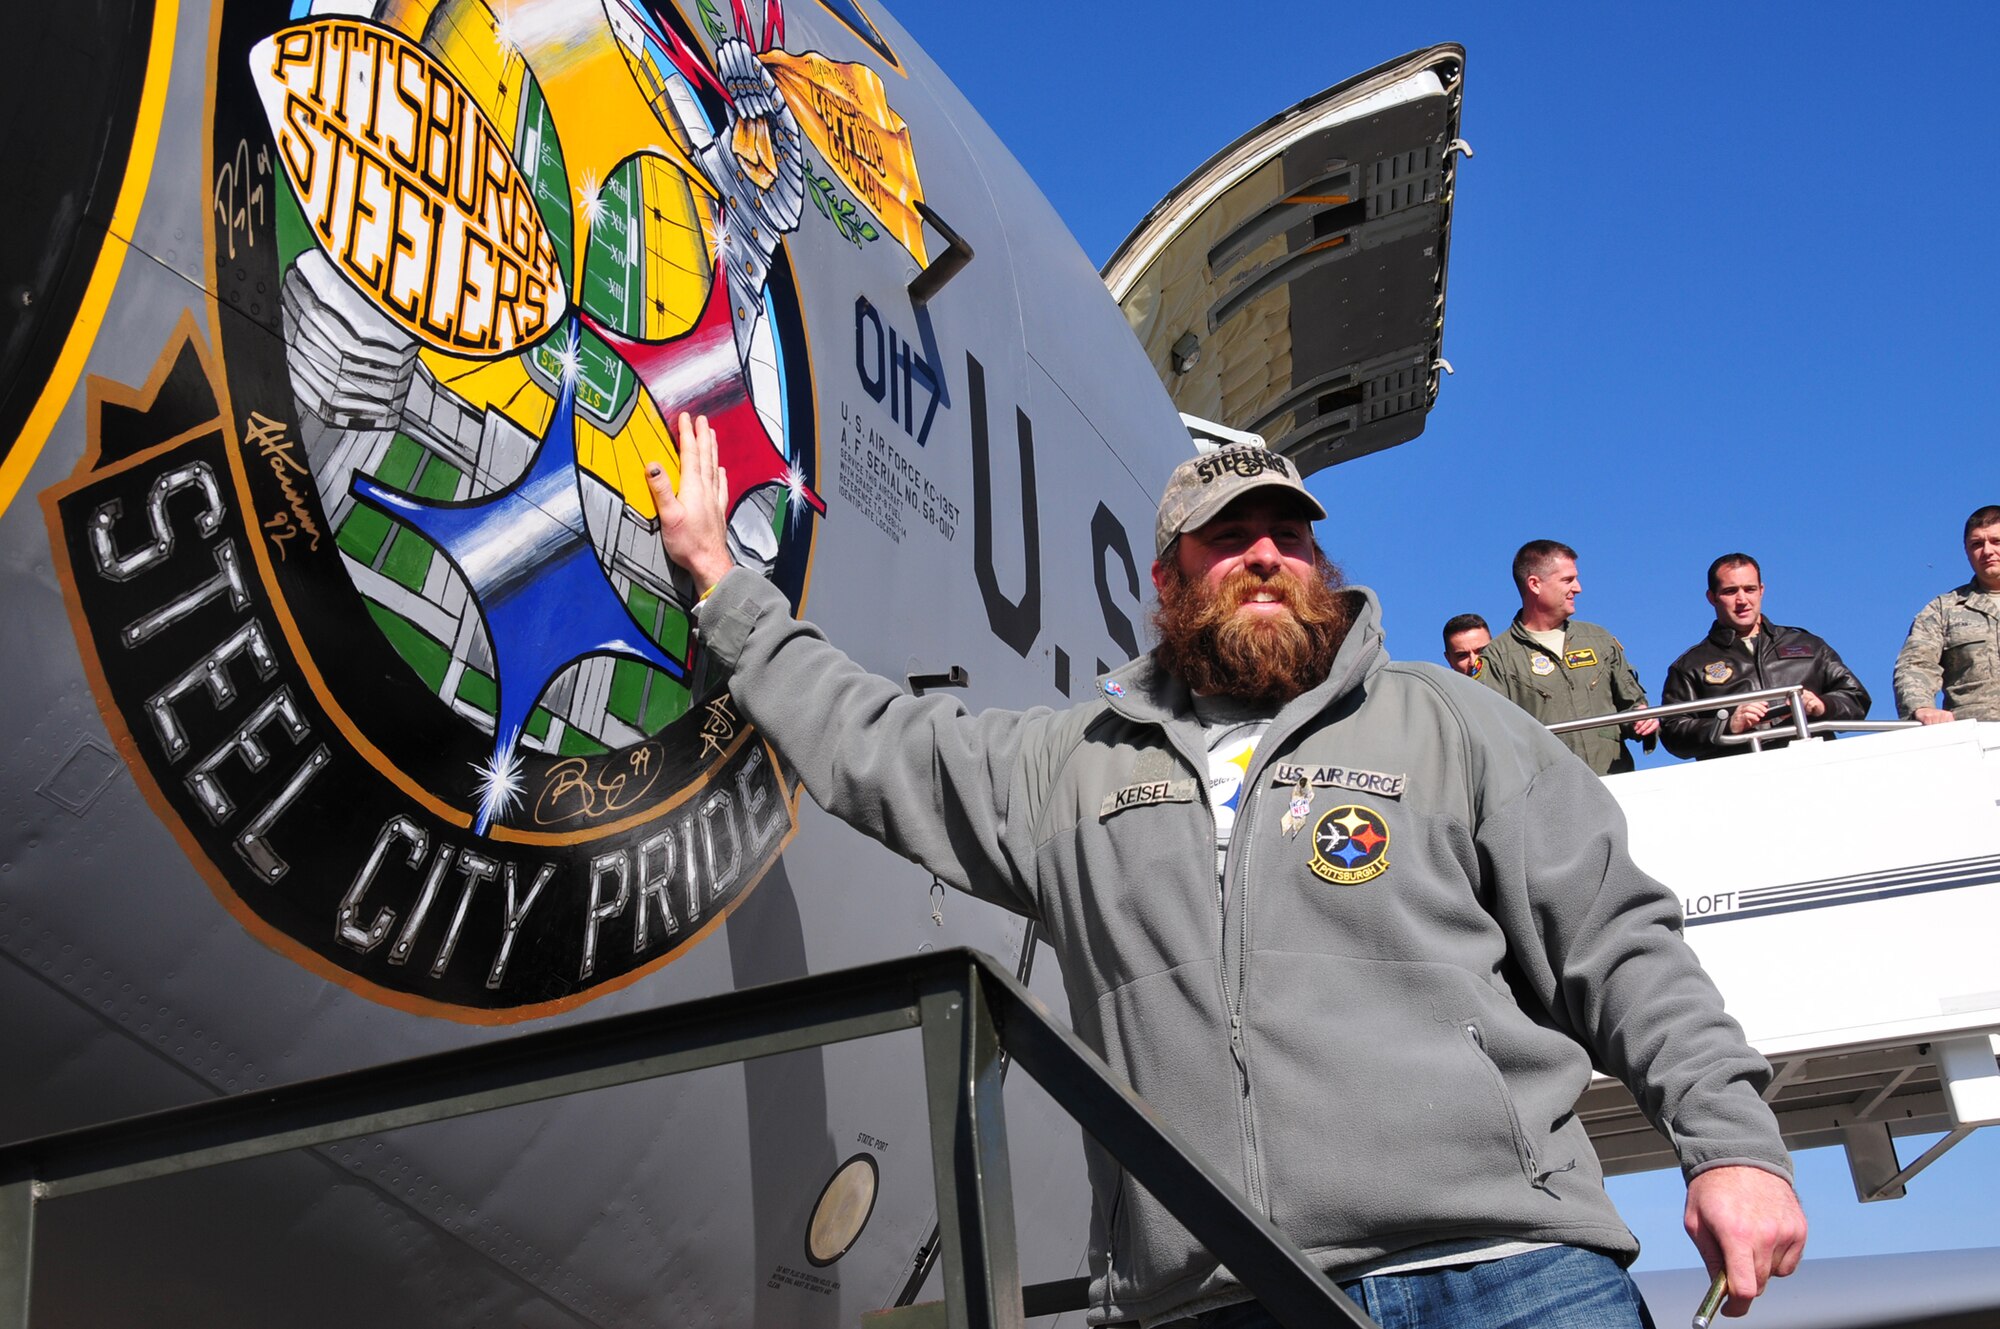 Four players from the Pittsburgh Steelers: Jonathan Dwyer, James Harrison, Brett Keisel and Doug Legursky visit the 171st Air Refueling Wing, November 6.  The visit, part of the "Salute to Service" campaign, is sponsored by the NFL in conjunction with USAA.  The NFL is also paying tribute to the Armed Forces throughout the month of November.  During the visit, the players take time to autograph one of the unit's KC-135 aircraft, Steel City Pride.
	
The Salute to Service campaign aligns with the NFL's long history of supporting America's armed services, including a partnership of more than 45 years with the USO that includes overseas visits to troops and trips to military hospitals nationwide. 

During the Pittsburgh Steelers' November 12 game, the Steelers will honor a veteran from every war, and recognize a local Harrier pilot who was shot down and killed last month over Afghanistan. The Steelers will also recognize their local military community by paying tribute to the service men and women of the 171st Air Refueling Wing. The team is partnering with USAA for a stadium-wide card stunt that features a special military appreciation message during the National Anthem. Fans will be instructed to hold up the card at their seats just before the National Anthem. 

(National Guard photo by Master Sgt. Ann Young/released)
